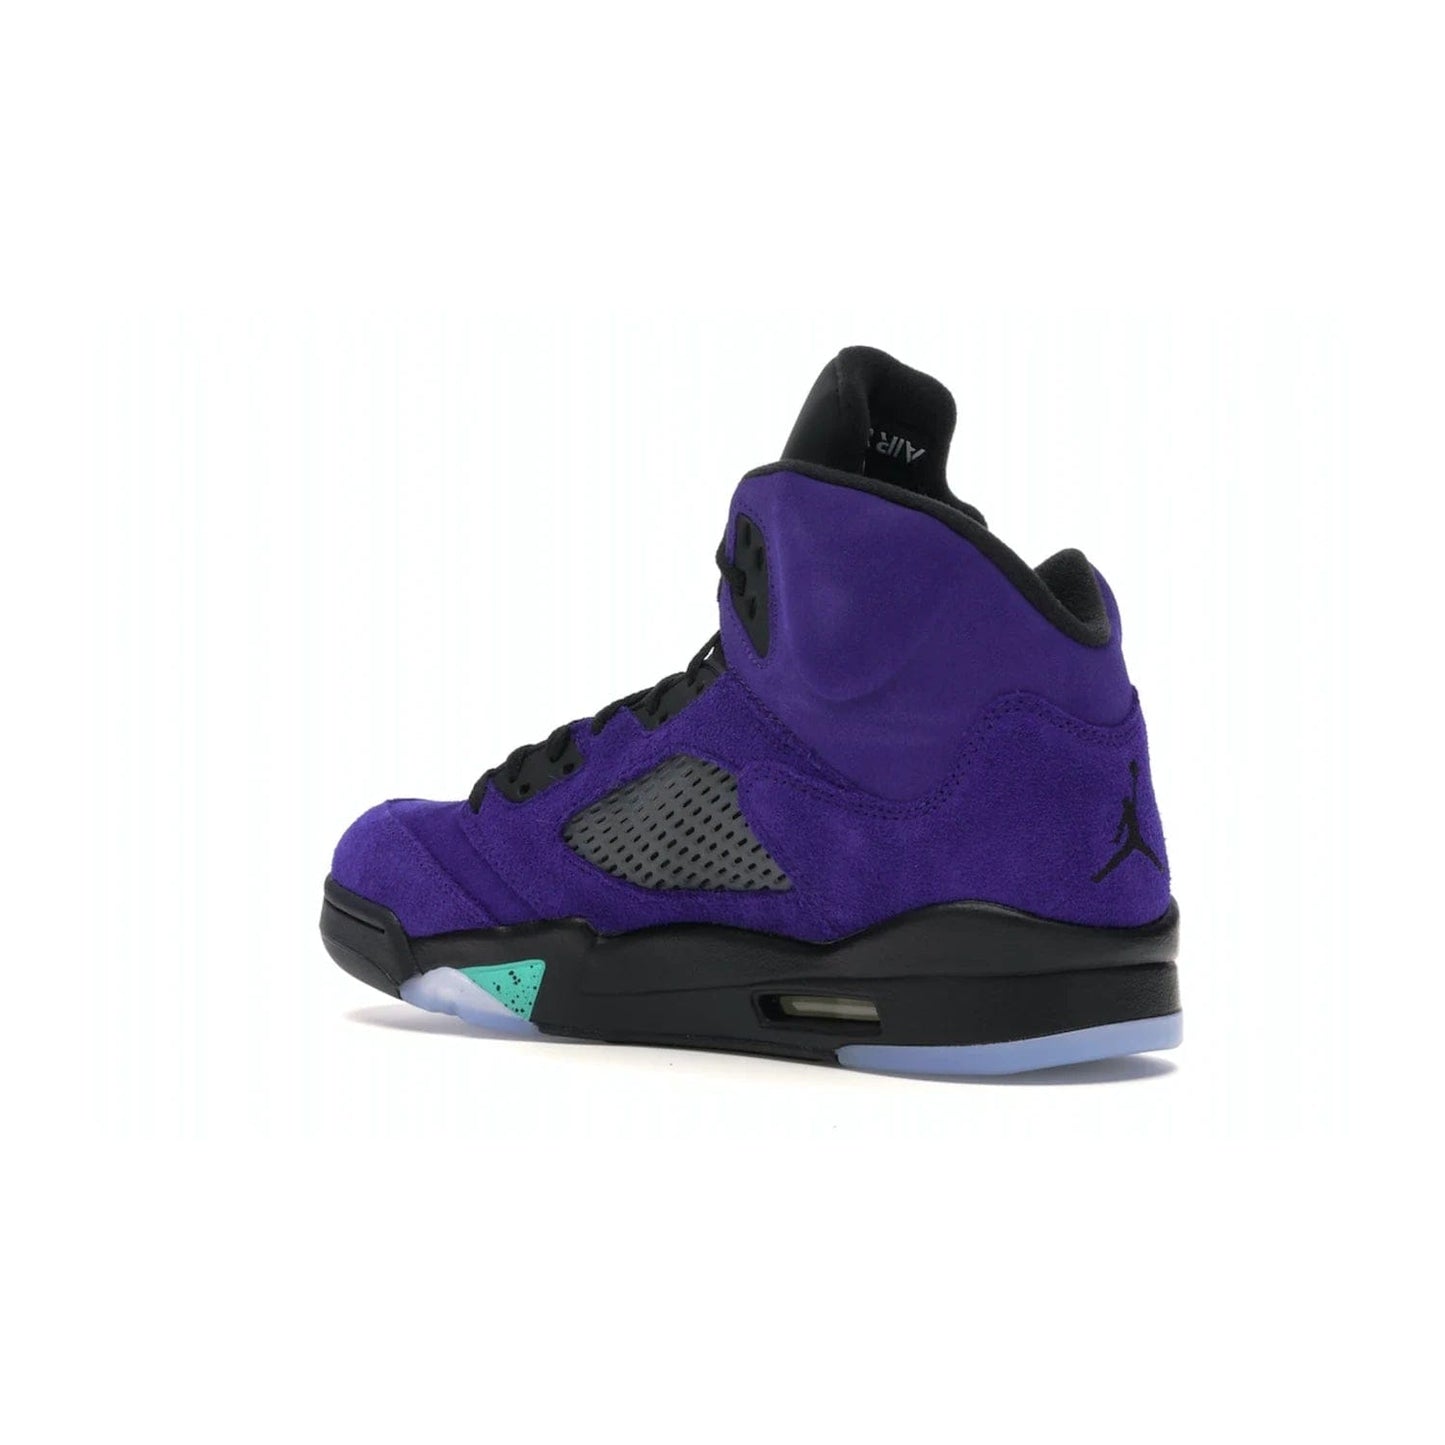 Jordan 5 Retro Alternate Grape - Image 23 - Only at www.BallersClubKickz.com - Bring the classic Jordan 5 Retro Alternate Grape to your sneaker collection! Featuring a purple suede upper, charcoal underlays, green detailing, and an icy and green outsole. Releasing for the first time since 1990, don't miss this chance to add a piece of sneaker history to your collection.